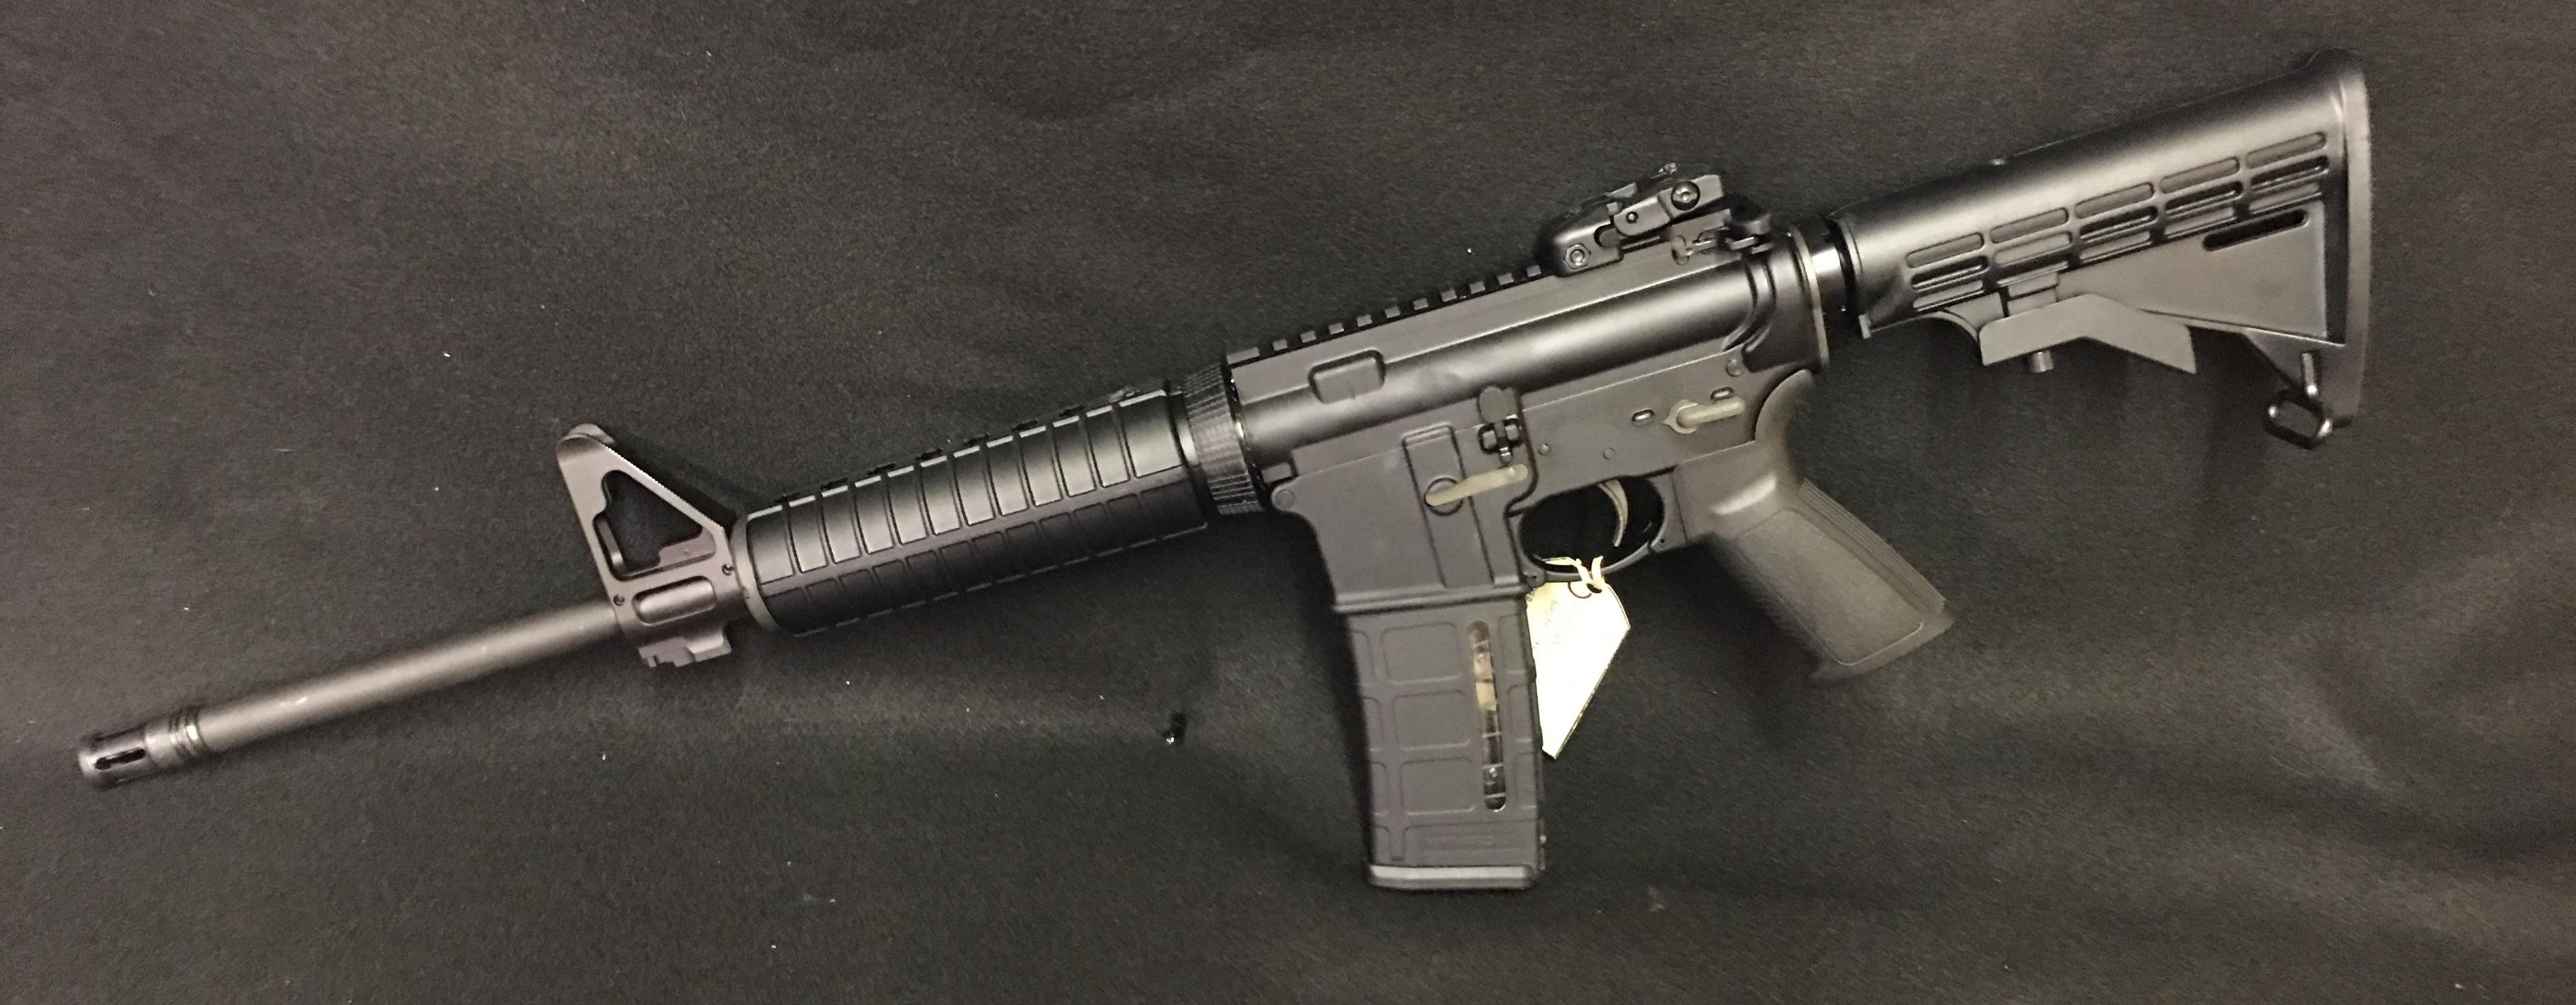 Ruger AR-556 w/PMAG